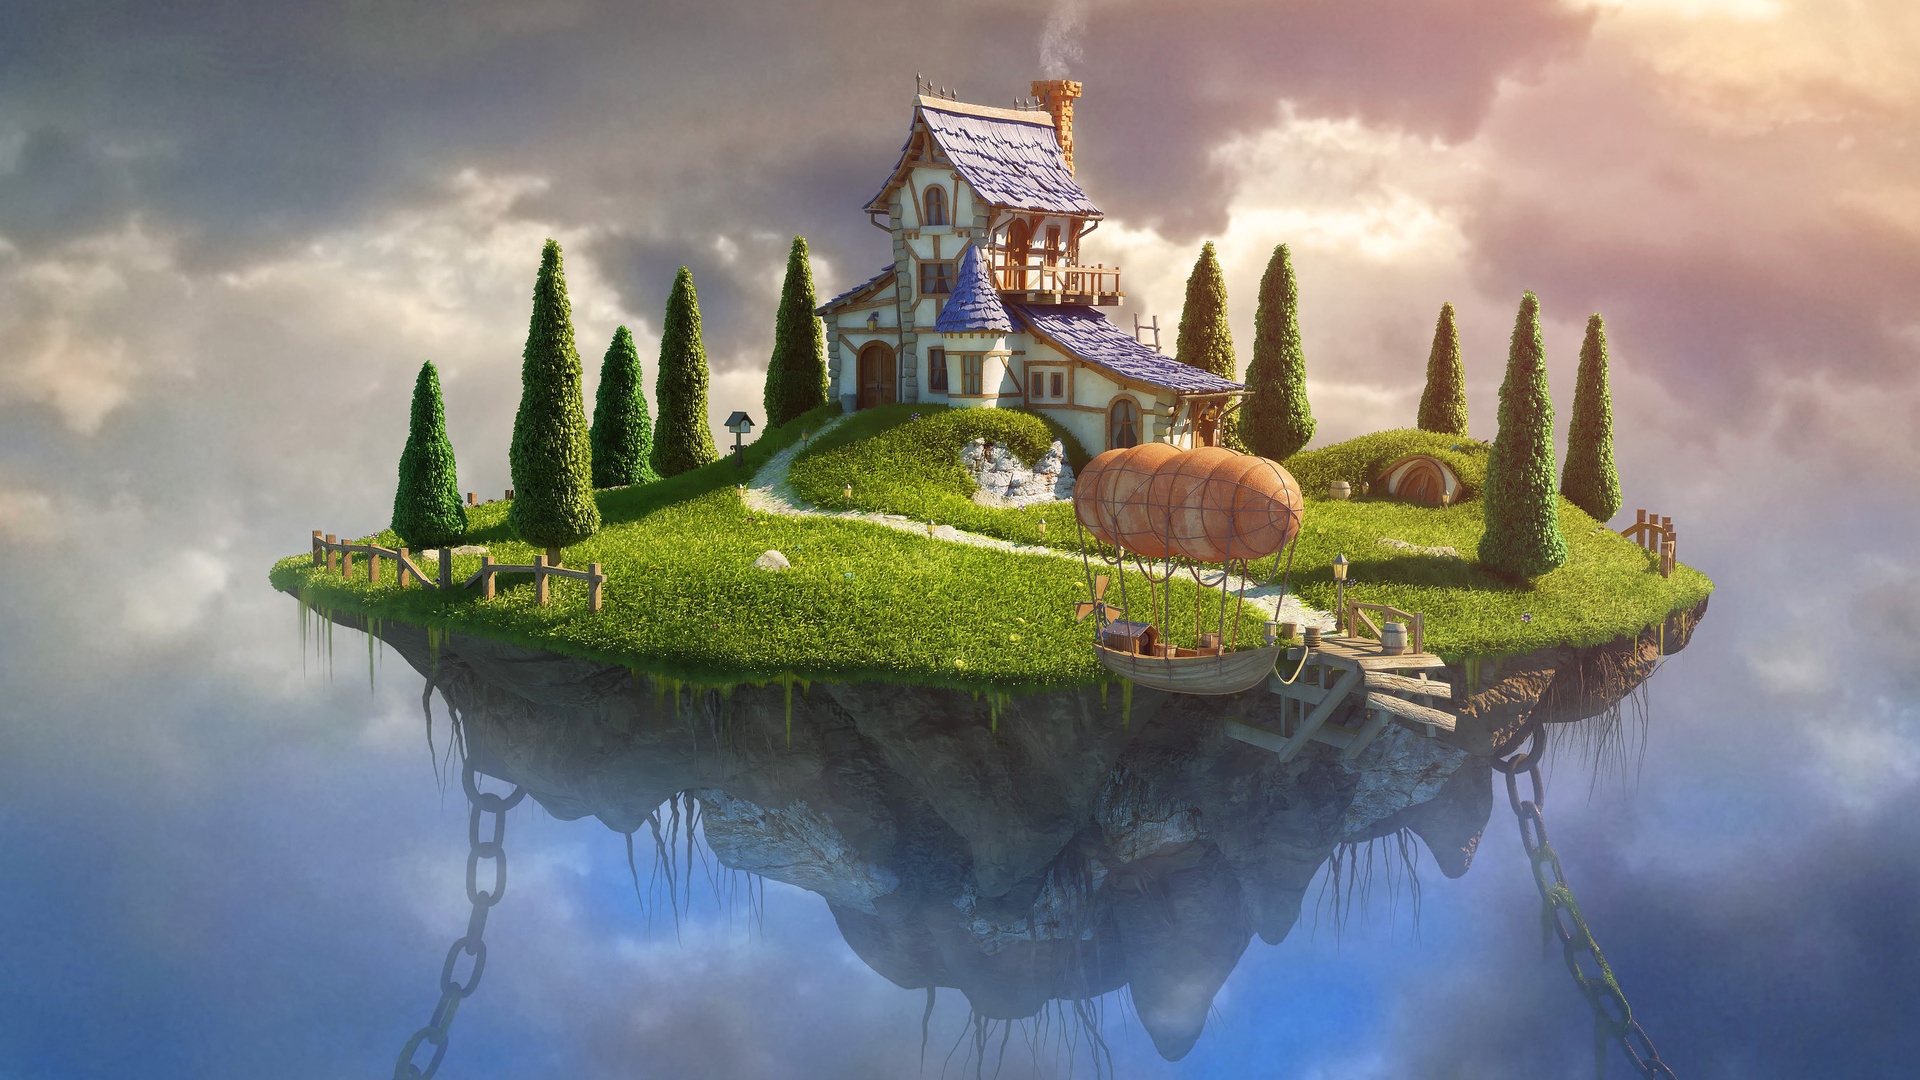 House on Piece of Earth in the Sky by Vladimir Kostuchek